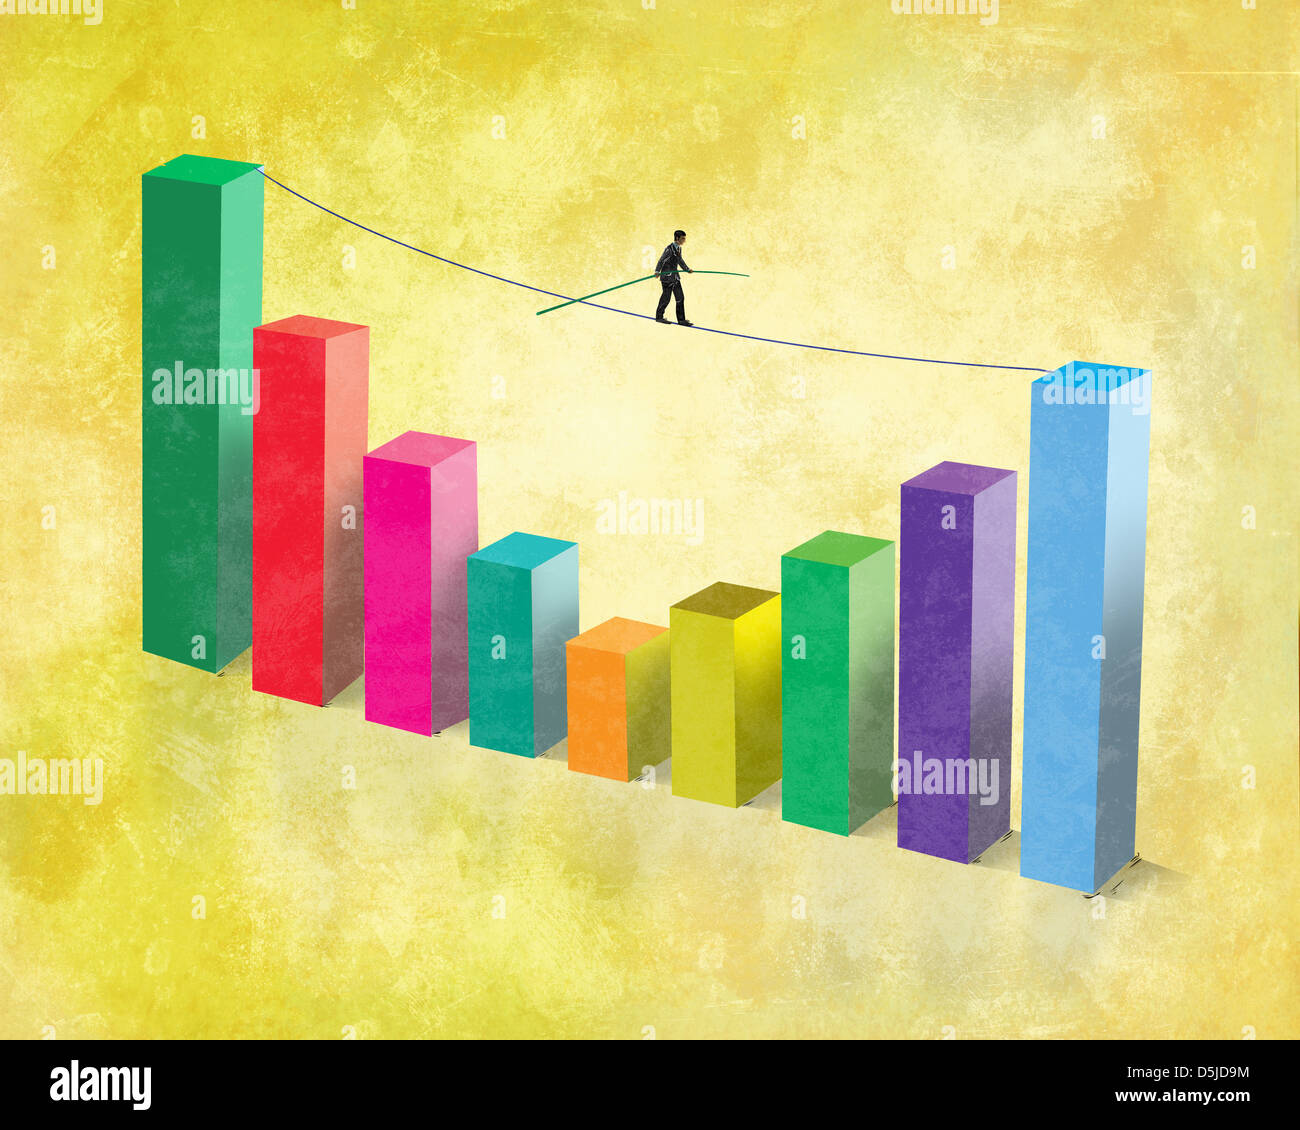 Illustrative image of businessman walking on rope attached to bar graph representing business ups and downs Stock Photo